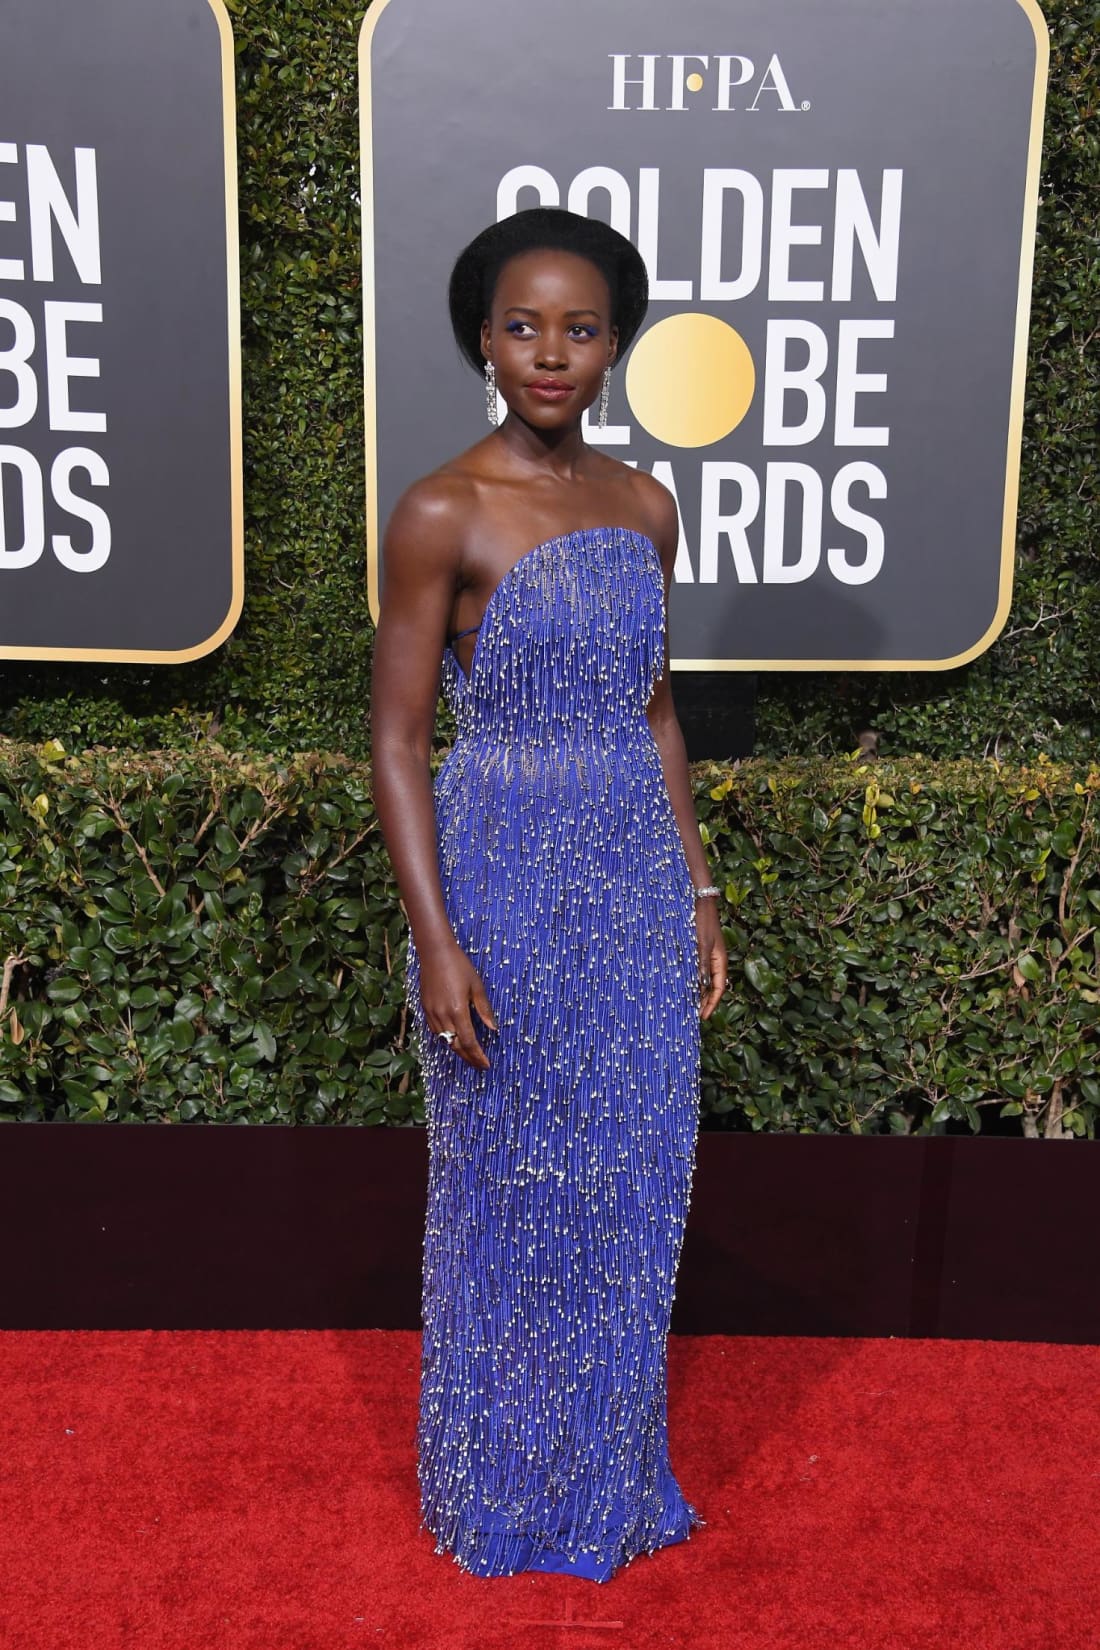 Golden Globes 2019: Best Dressed Celebrities At The Red Carpet